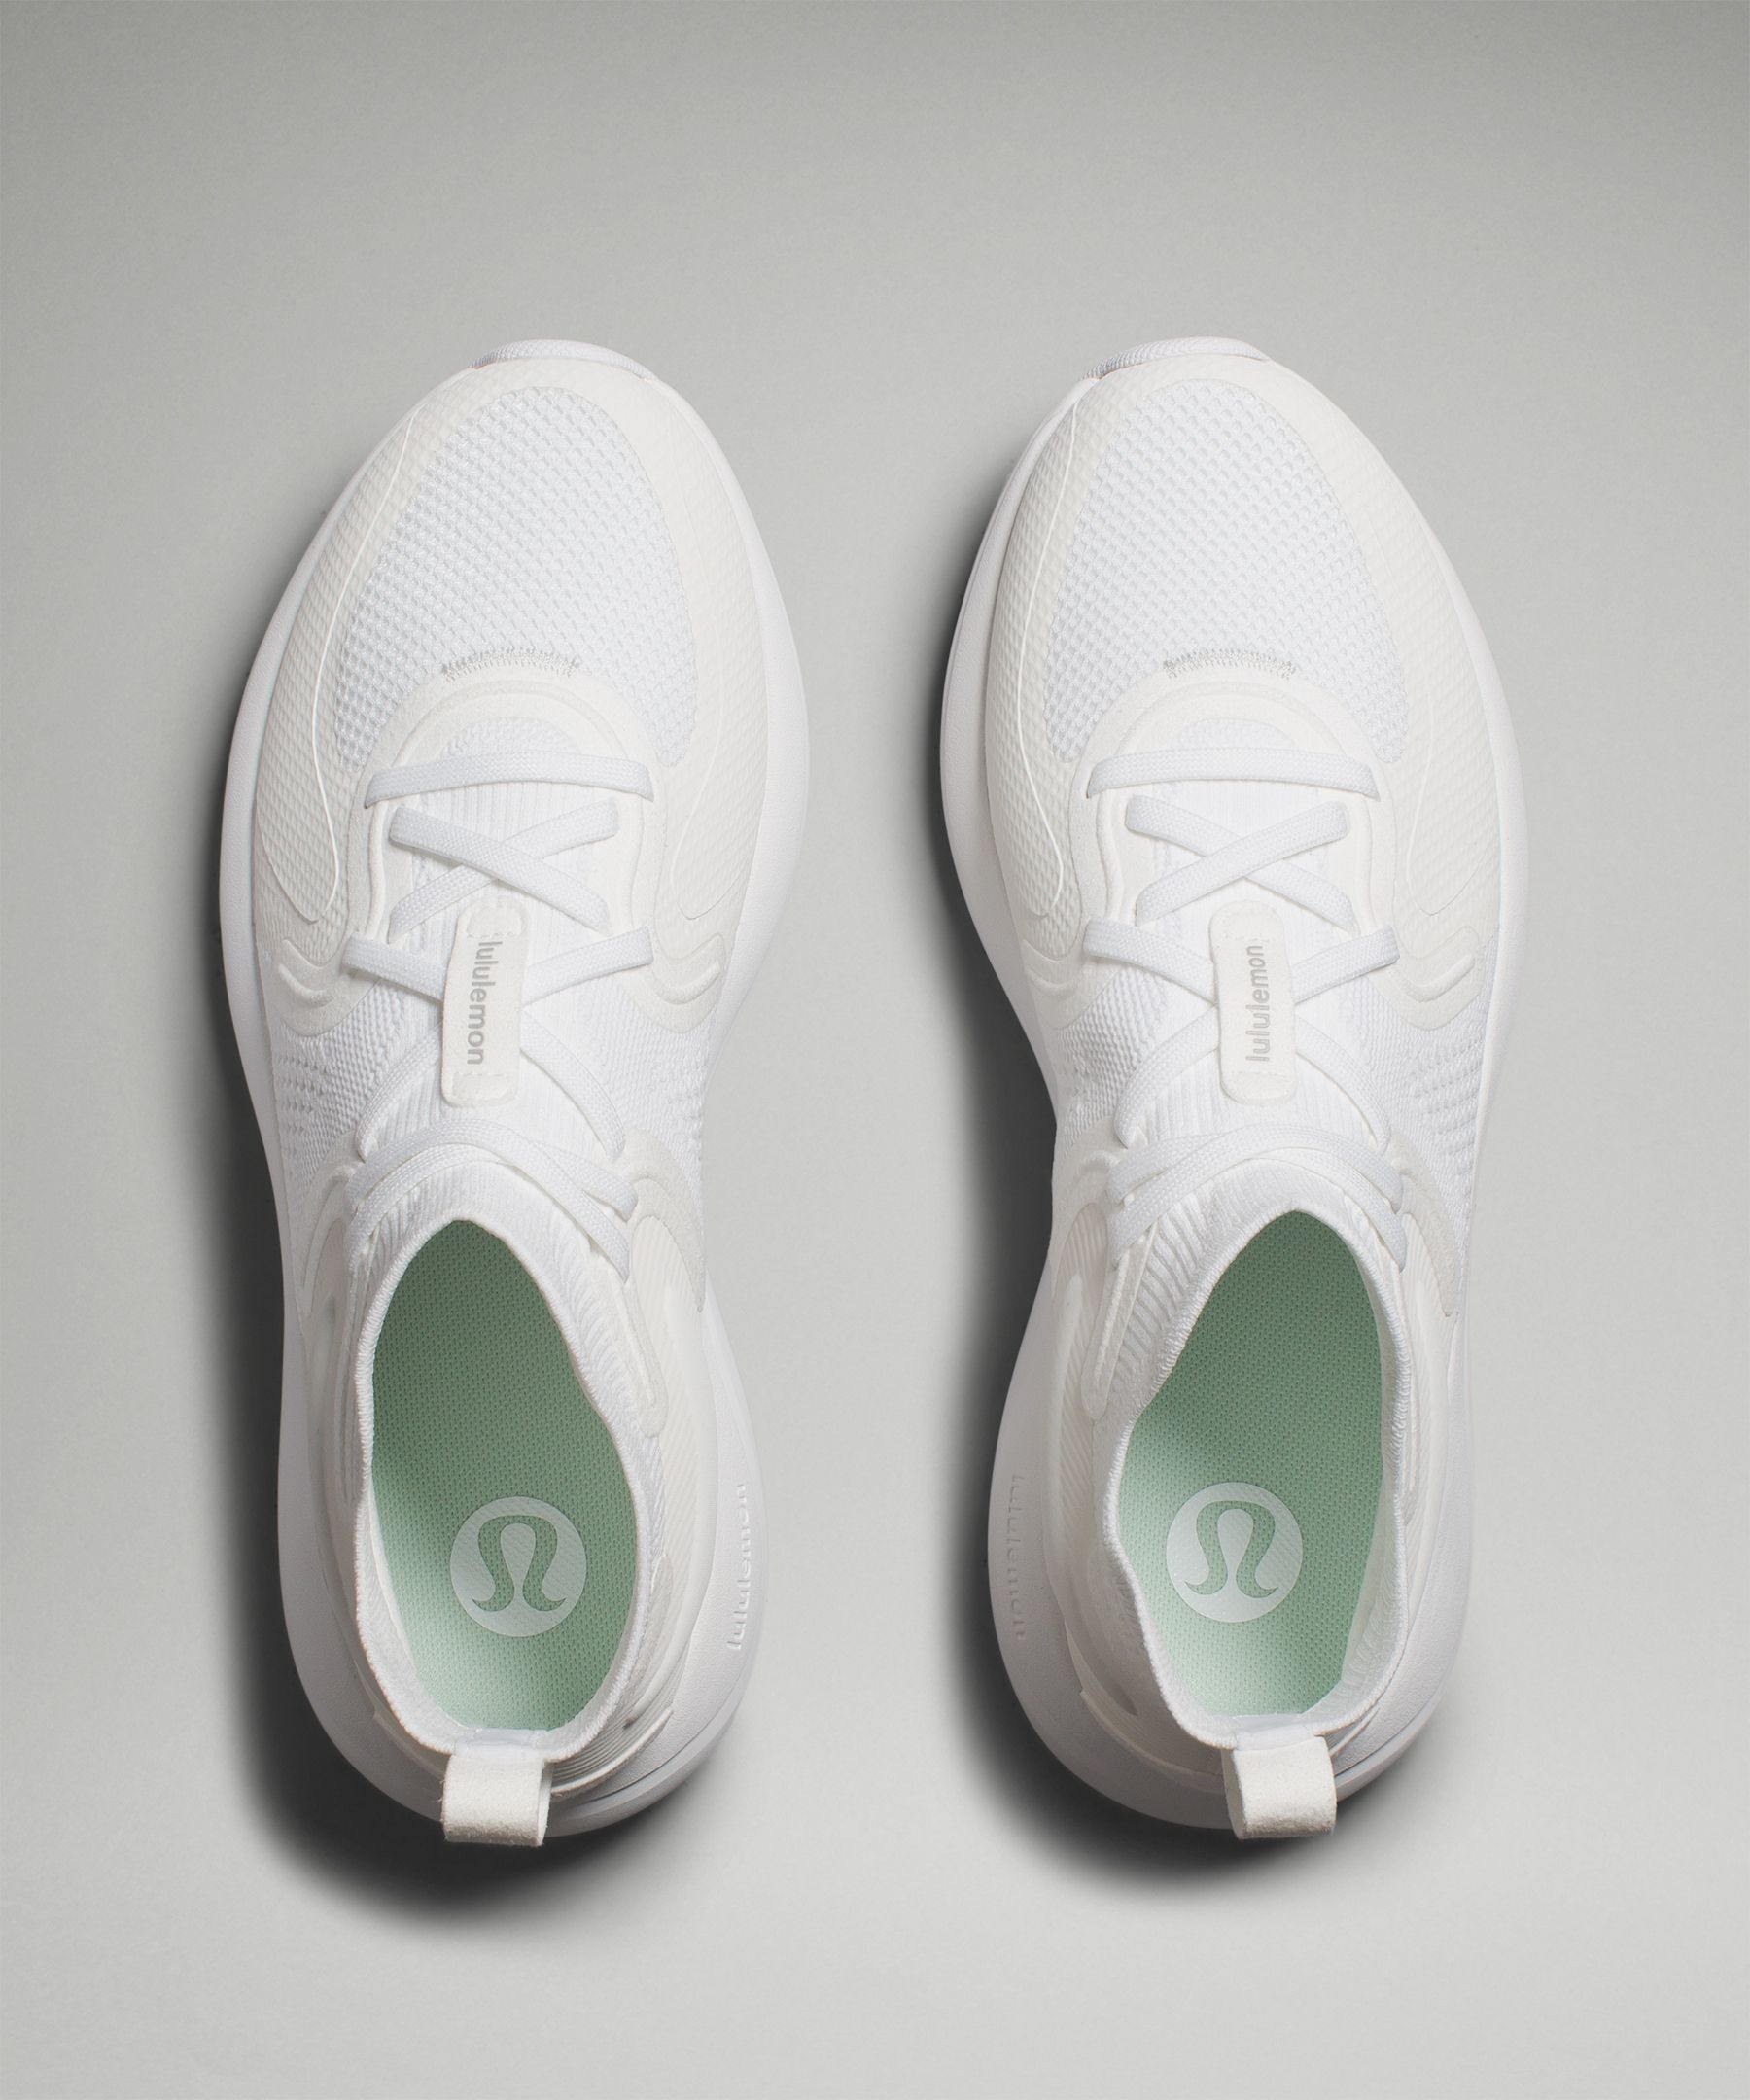 Lululemon Women's White and Cream Trainers size 10